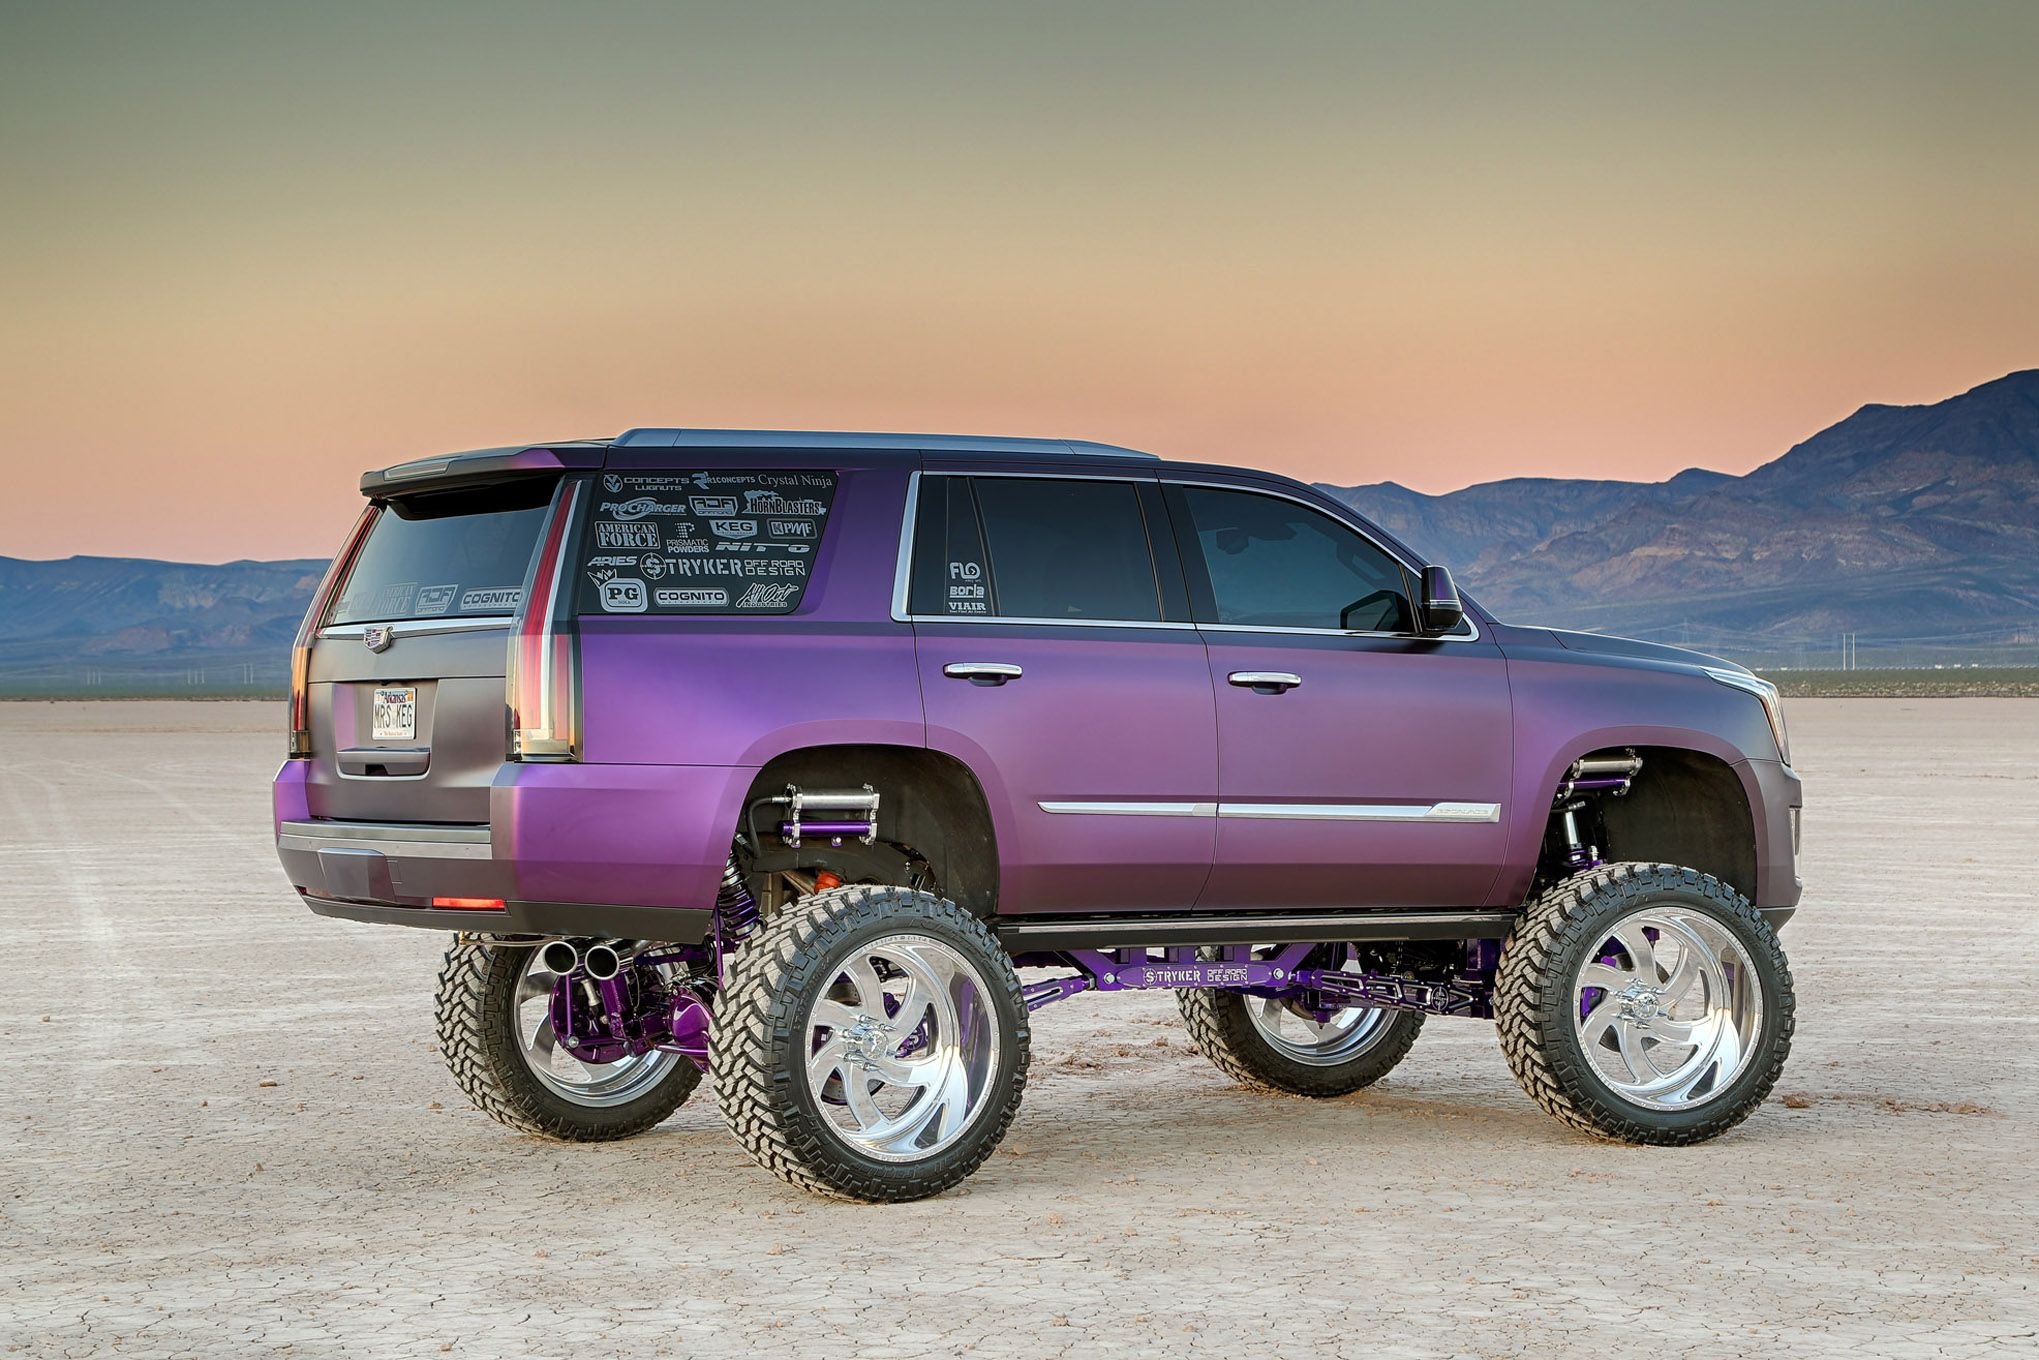 Matte Purple Cadillac Escalade with Roofline Spoiler - Photo by John O' Neill